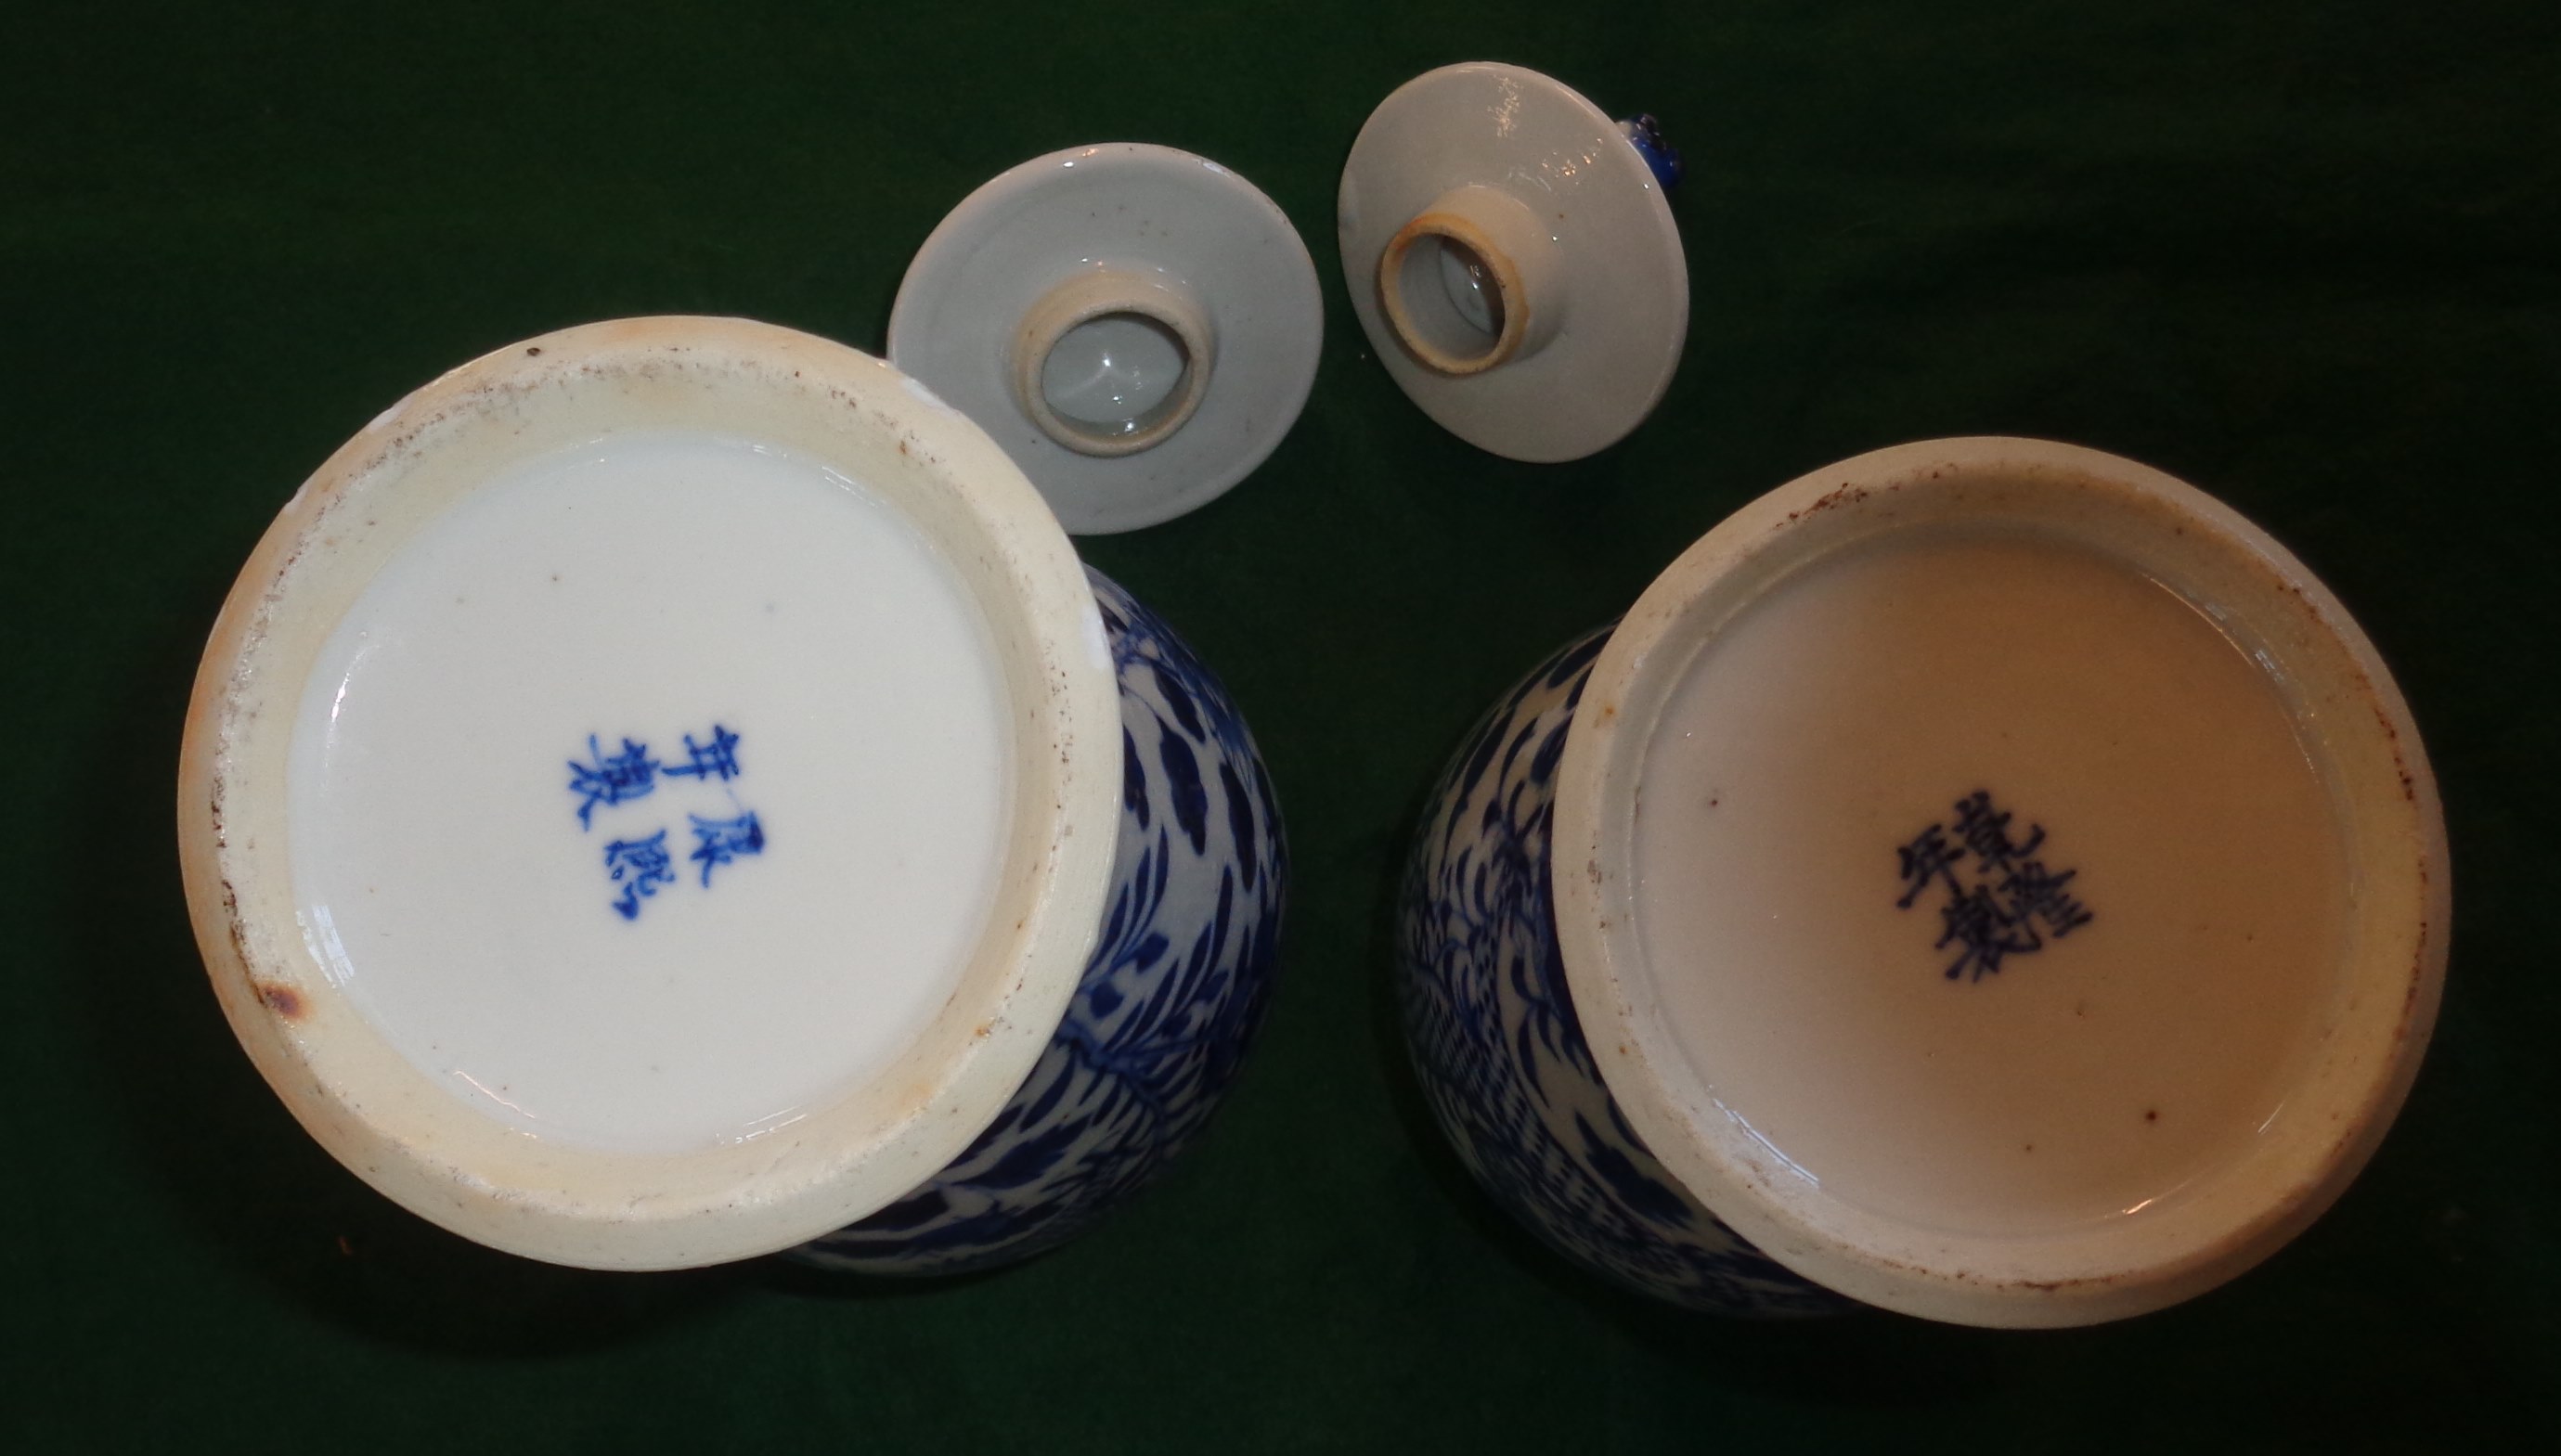 Pair of blue and white dragon vases with covers, 4 character marks, 26cm - Image 4 of 5